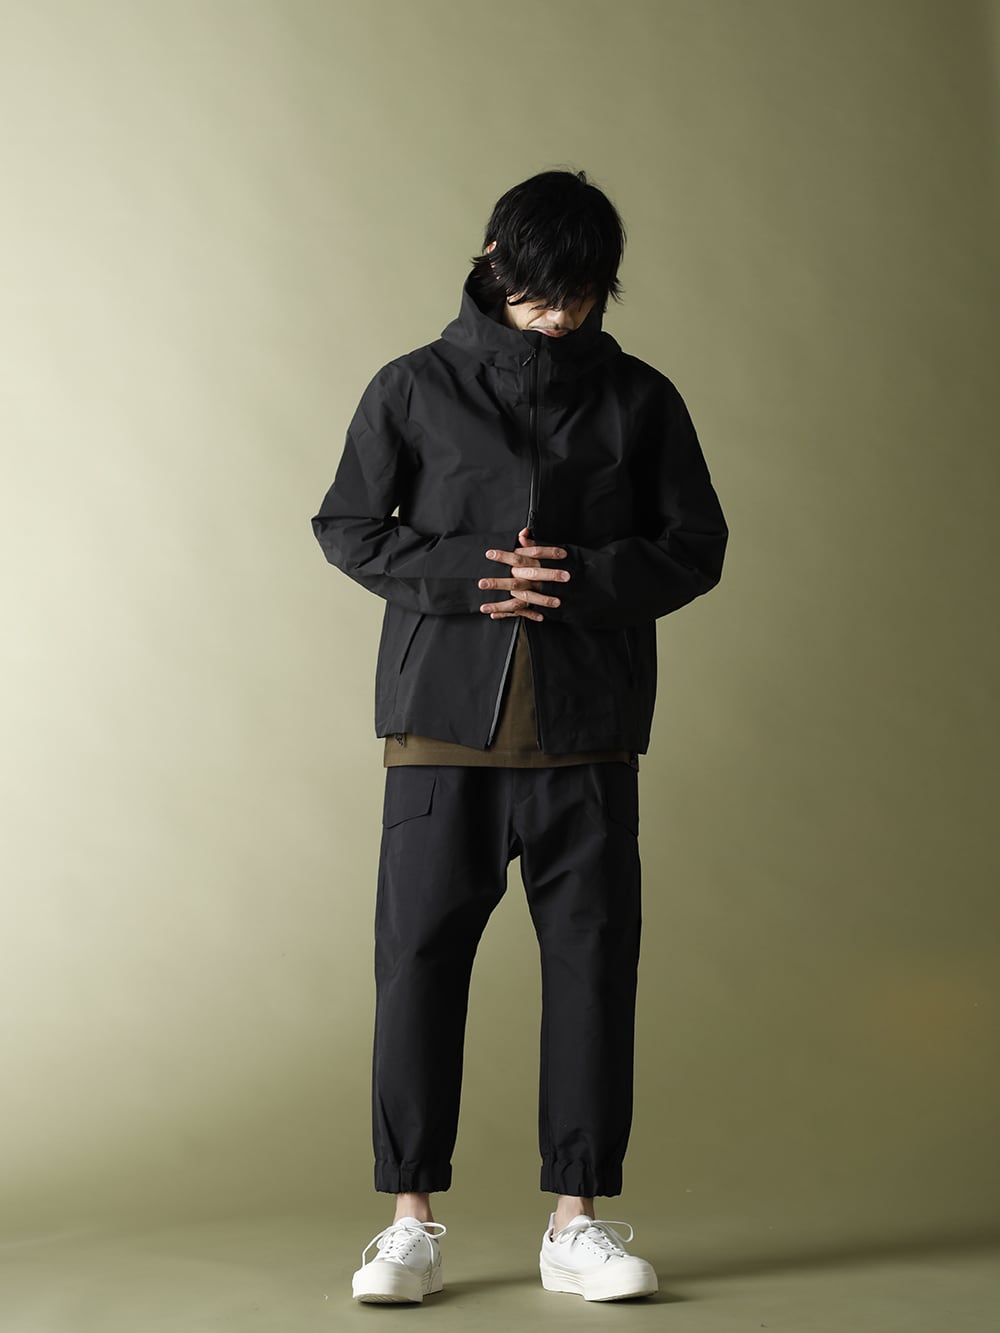 Y-3 - ワイスリー【Cover GTX Jacket】Spoty style!! - FASCINATE BLOG